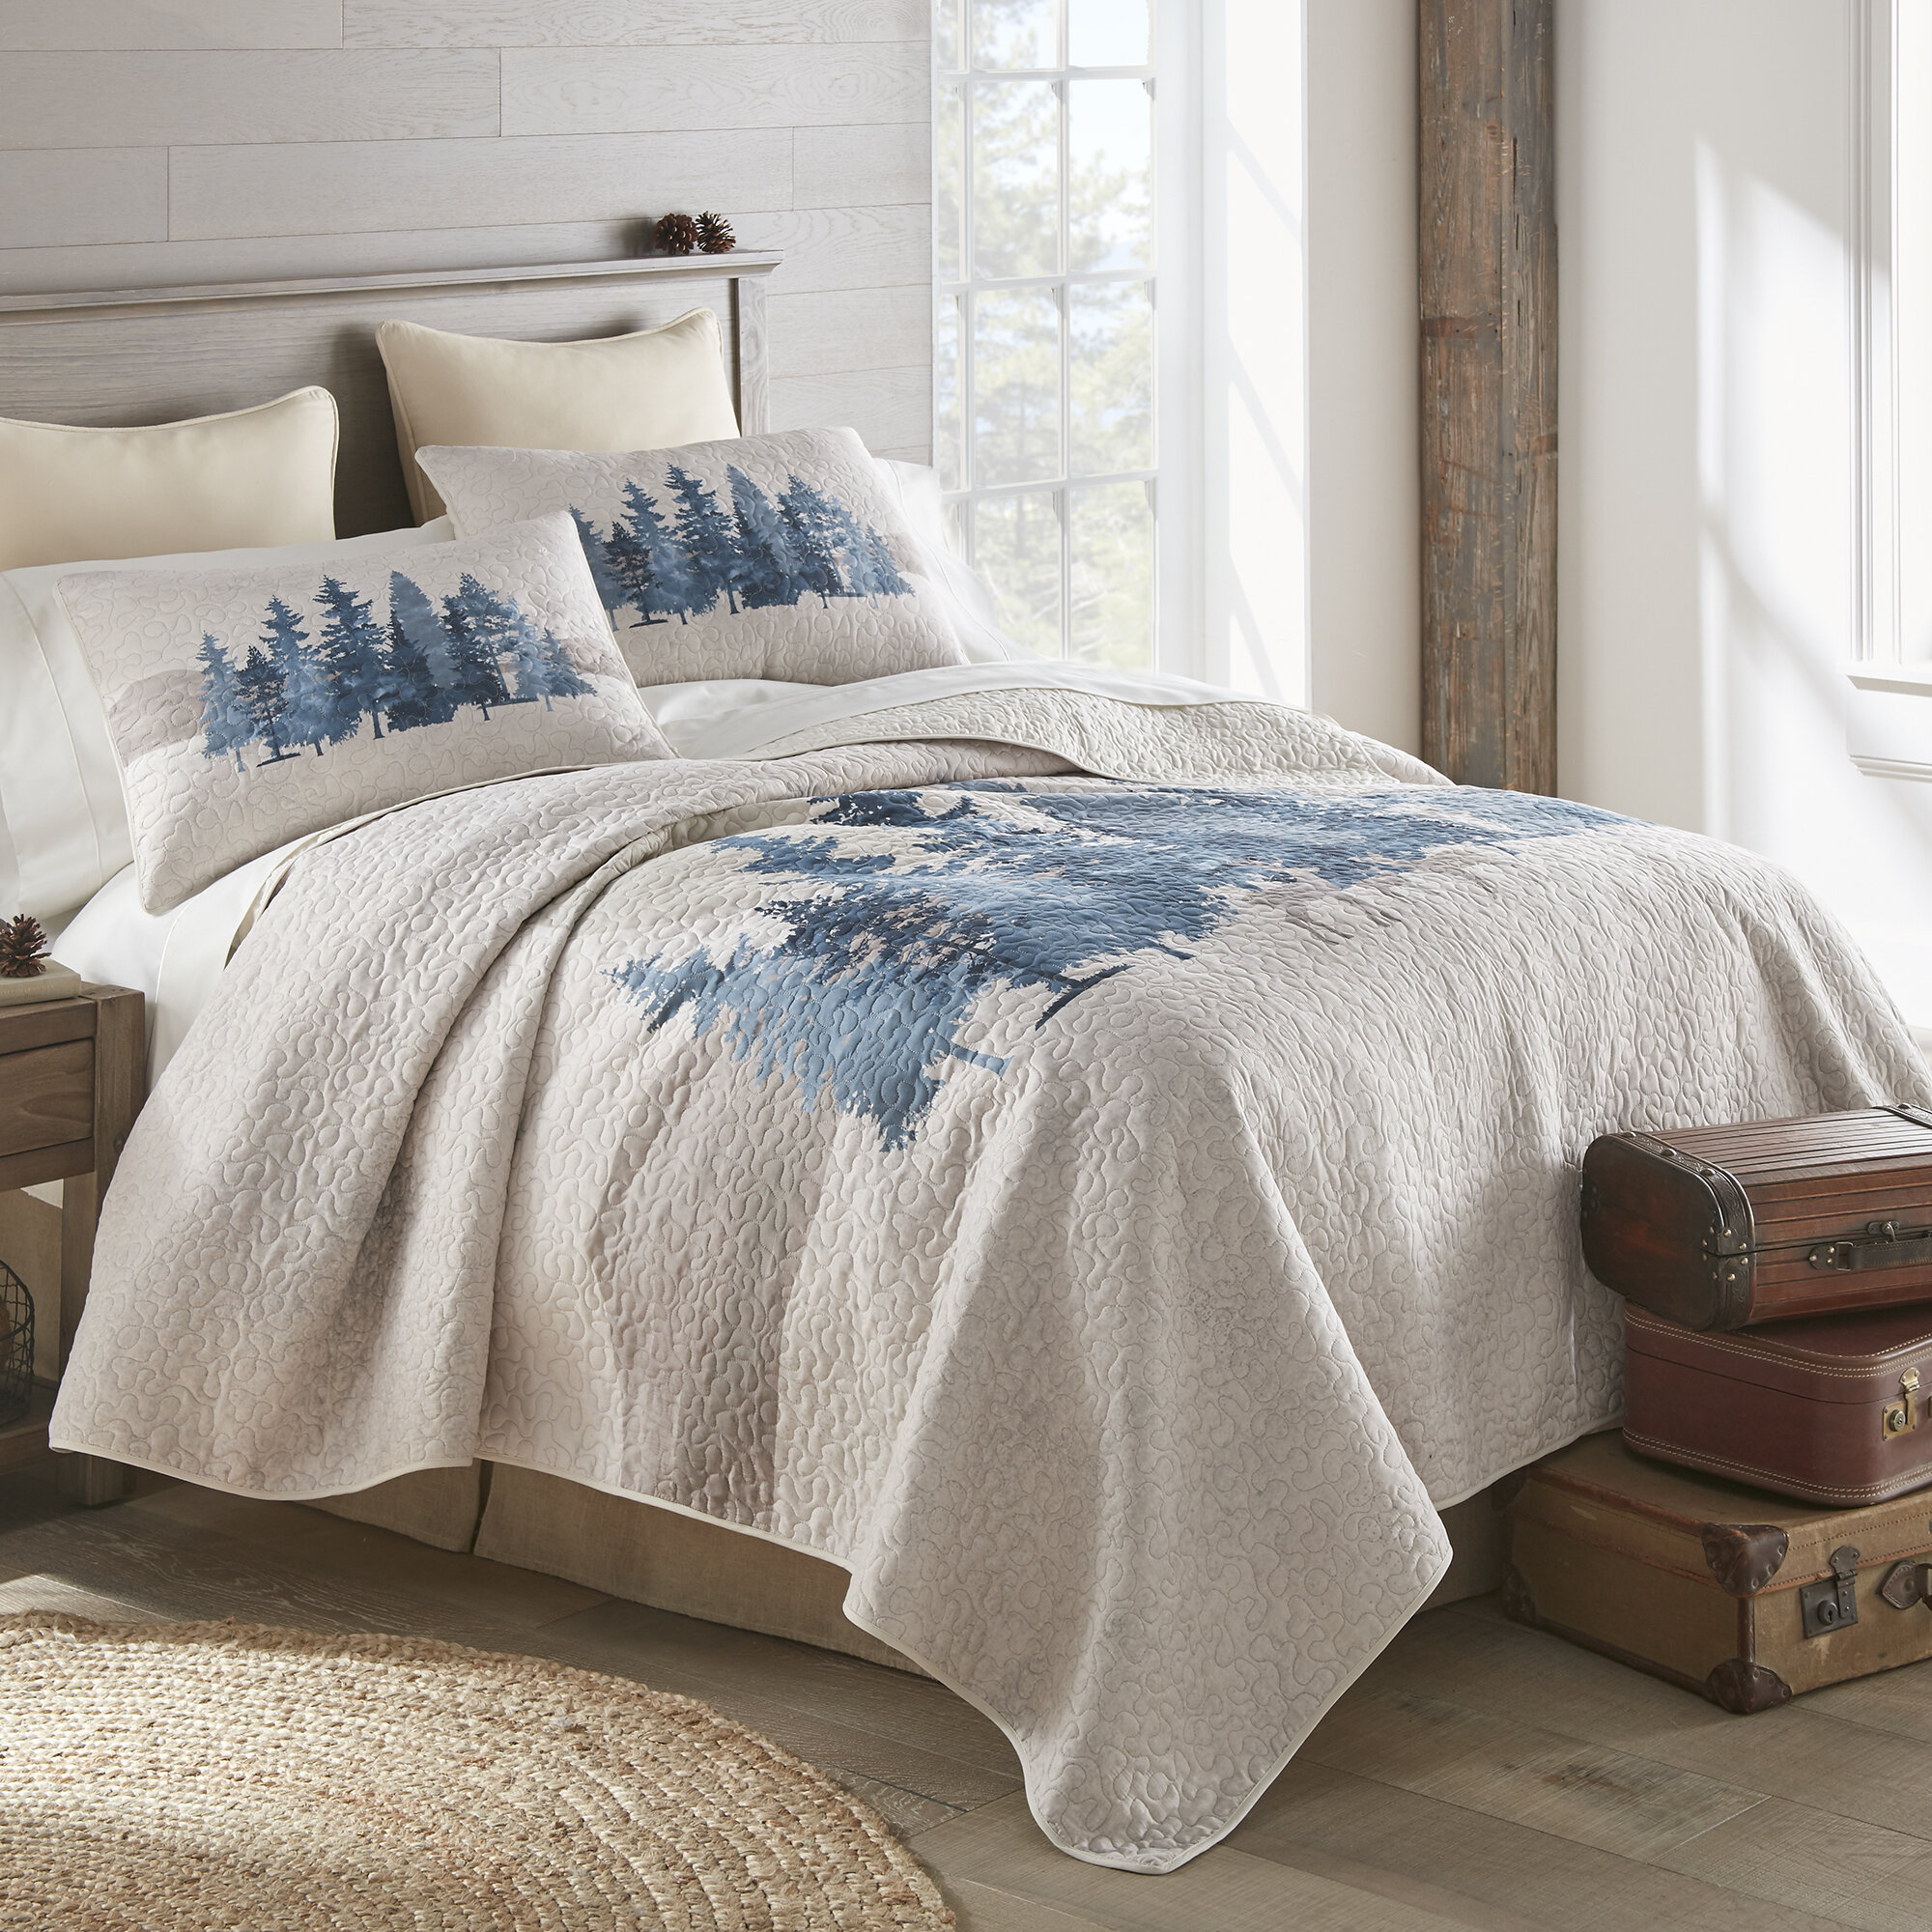 Donna Sharp Green Forest Deer Quilted Rustic Country King 3-Piece Bedding Set 